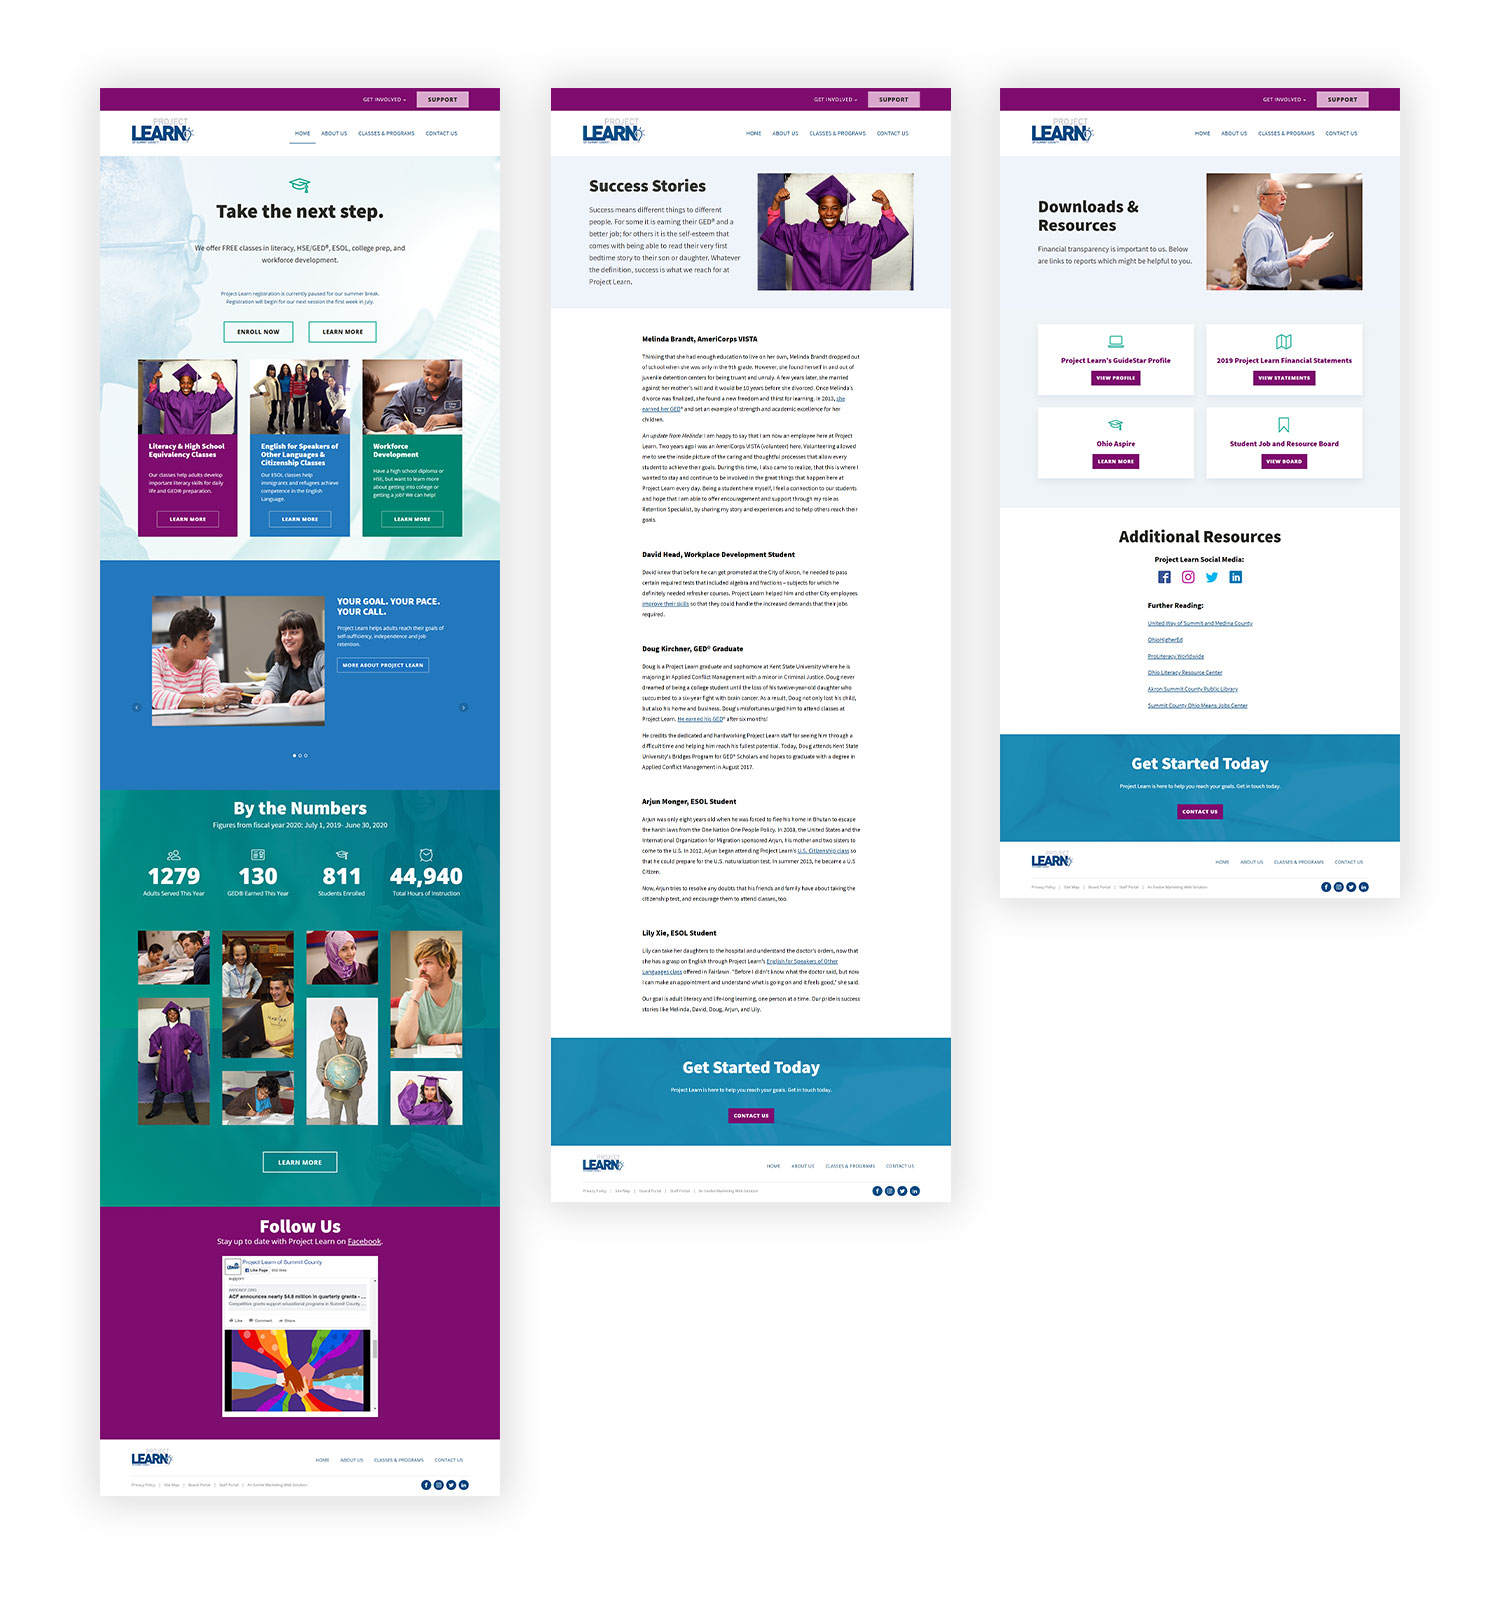 Three mockup images of Project Learn website